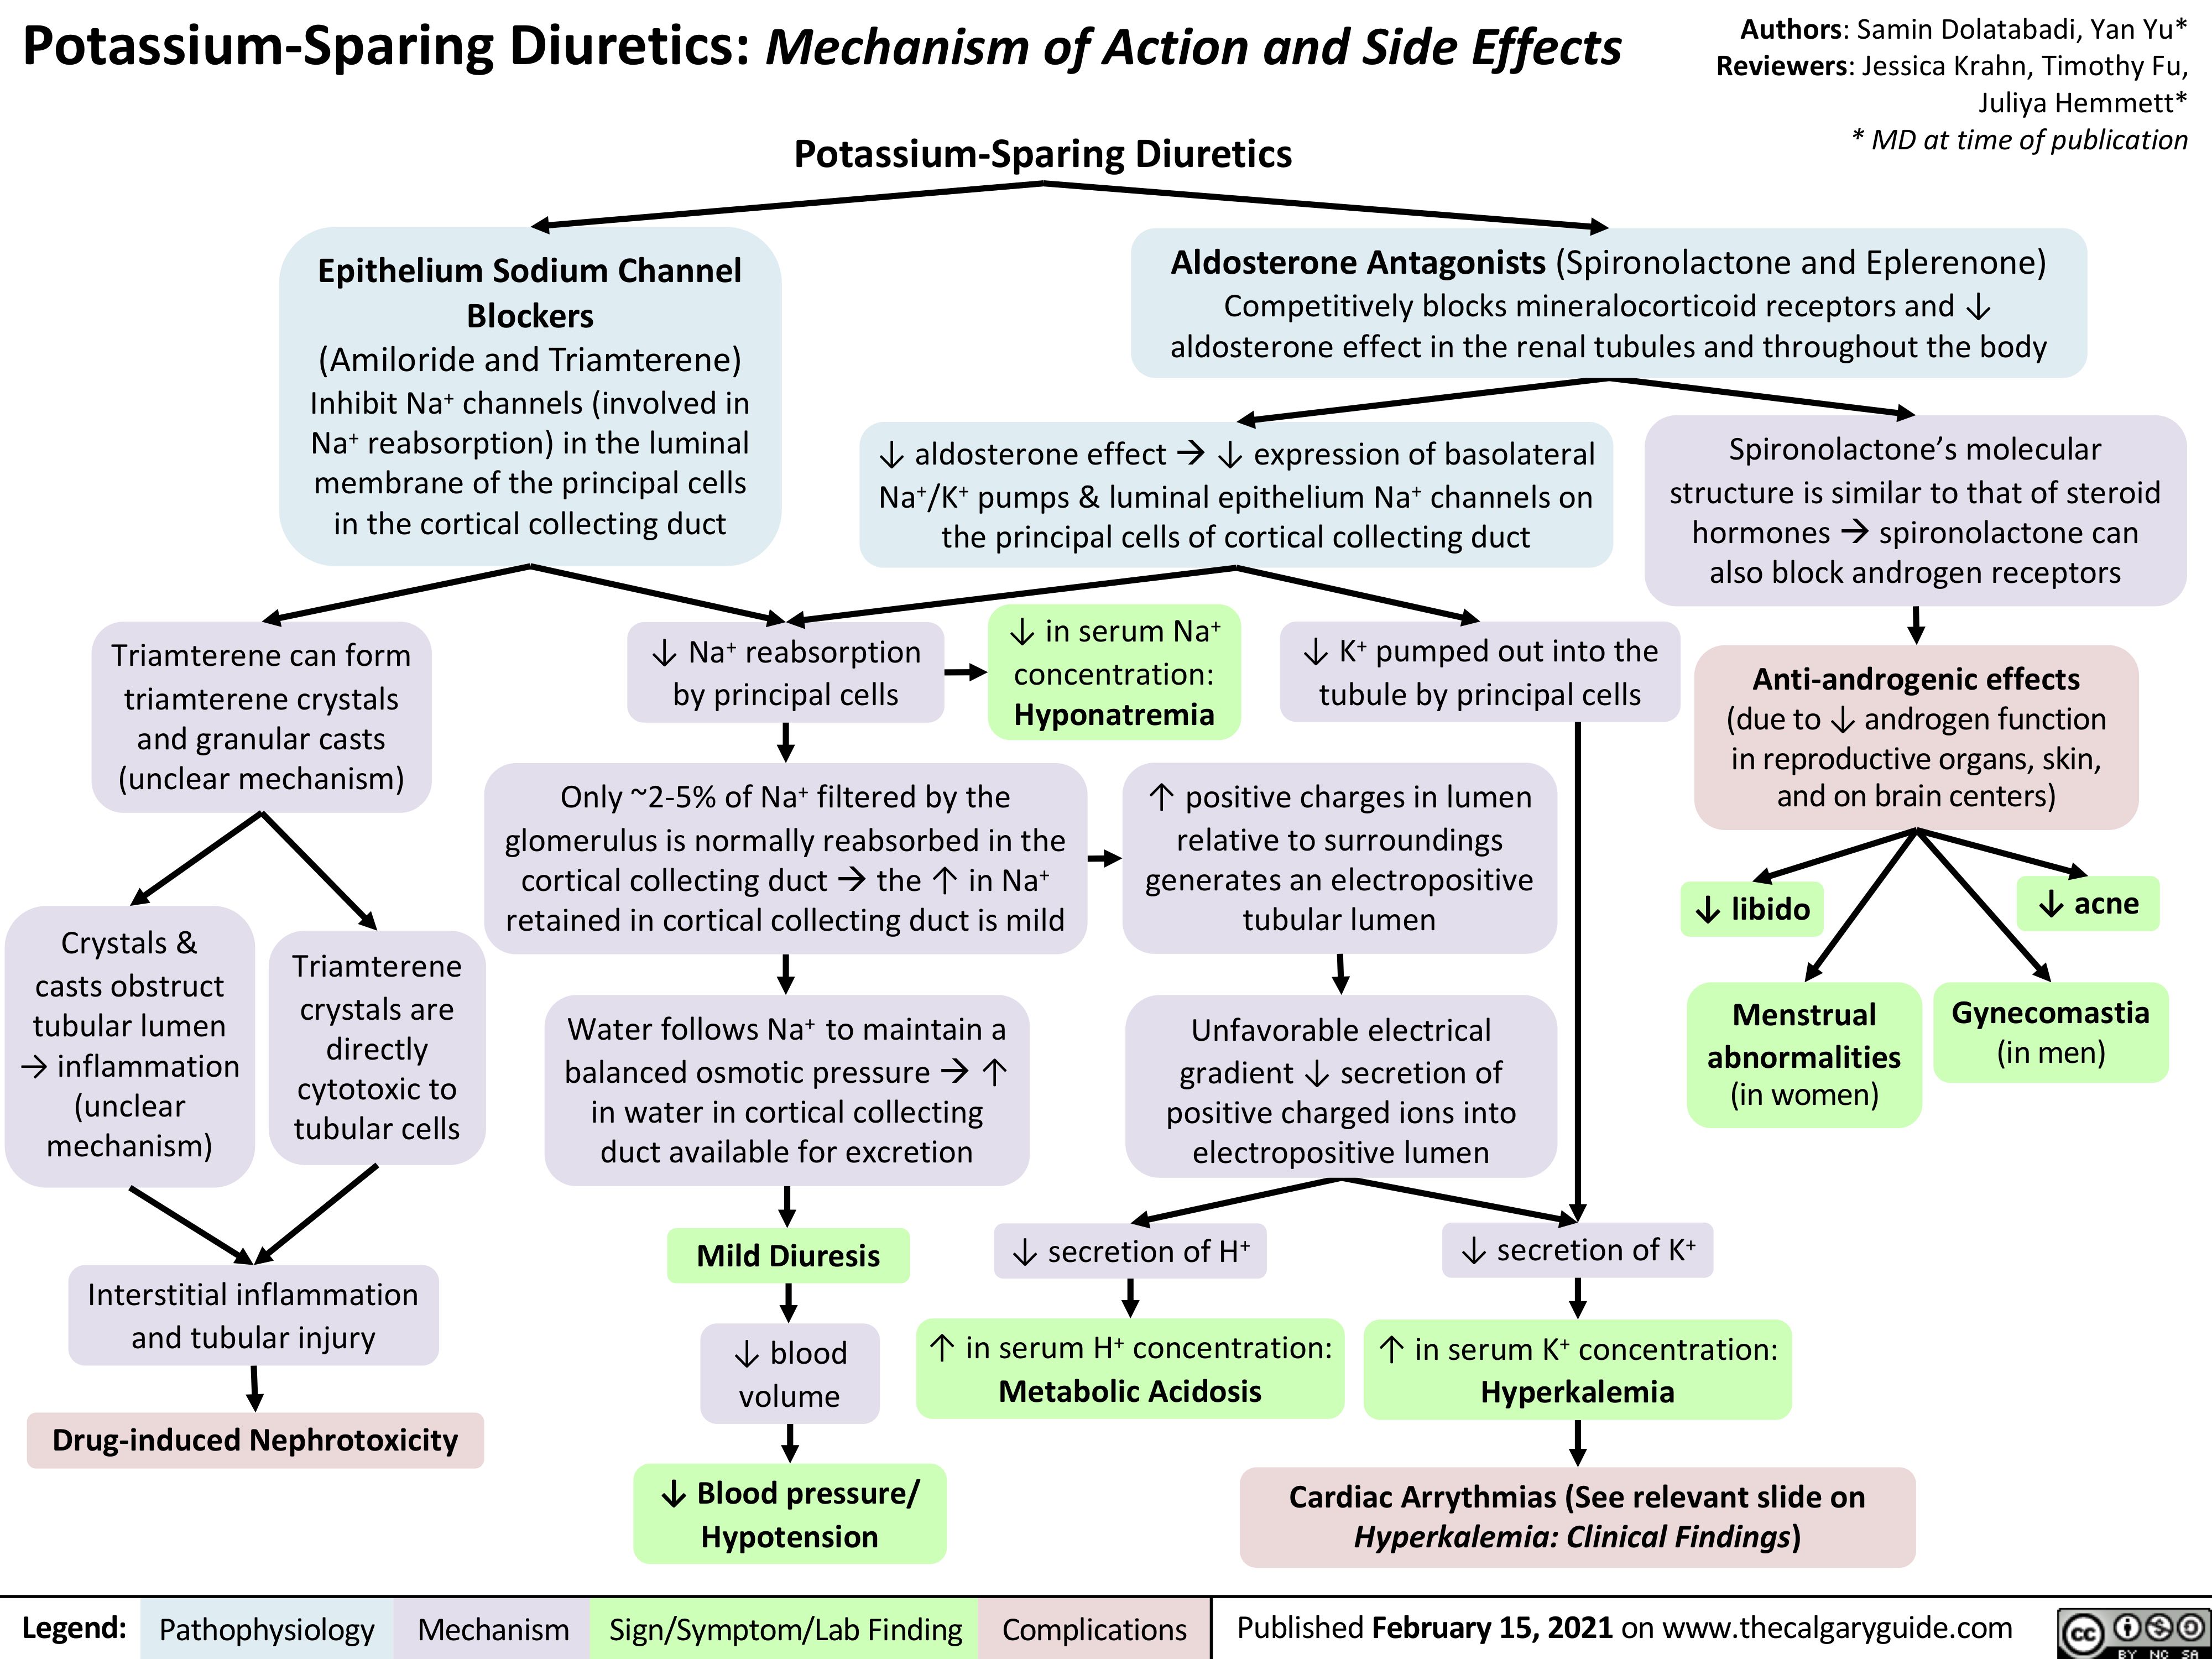 Potassium-Sparing Diuretics: Mechanism of Action and Side Effects Potassium-Sparing Diuretics
Authors: Samin Dolatabadi, Yan Yu* Reviewers: Jessica Krahn, Timothy Fu, Juliya Hemmett* * MD at time of publication
    Epithelium Sodium Channel Blockers (Amiloride and Triamterene) Inhibit Na+ channels (involved in Na+ reabsorption) in the luminal membrane of the principal cells in the cortical collecting duct
Aldosterone Antagonists (Spironolactone and Eplerenone) Competitively blocks mineralocorticoid receptors and ↓ aldosterone effect in the renal tubules and throughout the body
    ↓ aldosterone effectà↓ expression of basolateral Na+/K+ pumps & luminal epithelium Na+ channels on the principal cells of cortical collecting duct
Spironolactone’s molecular structure is similar to that of steroid
hormonesàspironolactone can also block androgen receptors
Anti-androgenic effects
(due to ↓ androgen function in reproductive organs, skin, and on brain centers)
        Triamterene can form triamterene crystals
and granular casts (unclear mechanism)
↓ Na+ reabsorption by principal cells
↓ in serum Na+ concentration: Hyponatremia
↓ K+ pumped out into the tubule by principal cells
               Crystals & casts obstruct tubular lumen → inflammation (unclear mechanism)
Triamterene crystals are
directly cytotoxic to tubular cells
Only ~2-5% of Na+ filtered by the glomerulus is normally reabsorbed in the
cortical collecting ductàthe ↑ in Na+ retained in cortical collecting duct is mild
Water follows Na+ to maintain a balanced osmotic pressureà↑ in water in cortical collecting duct available for excretion
↑ positive charges in lumen relative to surroundings generates an electropositive tubular lumen
Unfavorable electrical gradient ↓ secretion of positive charged ions into electropositive lumen
↓ libido
Menstrual abnormalities (in women)
↓ acne Gynecomastia
(in men)
              ↓ secretion of K+
↑ in serum K+ concentration:
Hyperkalemia
Cardiac Arrythmias (See relevant slide on Hyperkalemia: Clinical Findings)
  Interstitial inflammation and tubular injury
Drug-induced Nephrotoxicity
Mild Diuresis
↓ blood volume
↓ Blood pressure/ Hypotension
↓ secretion of H+
↑ in serum H+ concentration:
Metabolic Acidosis
             Legend:
 Pathophysiology
 Mechanism
Sign/Symptom/Lab Finding
  Complications
Published February 15, 2021 on www.thecalgaryguide.com
   